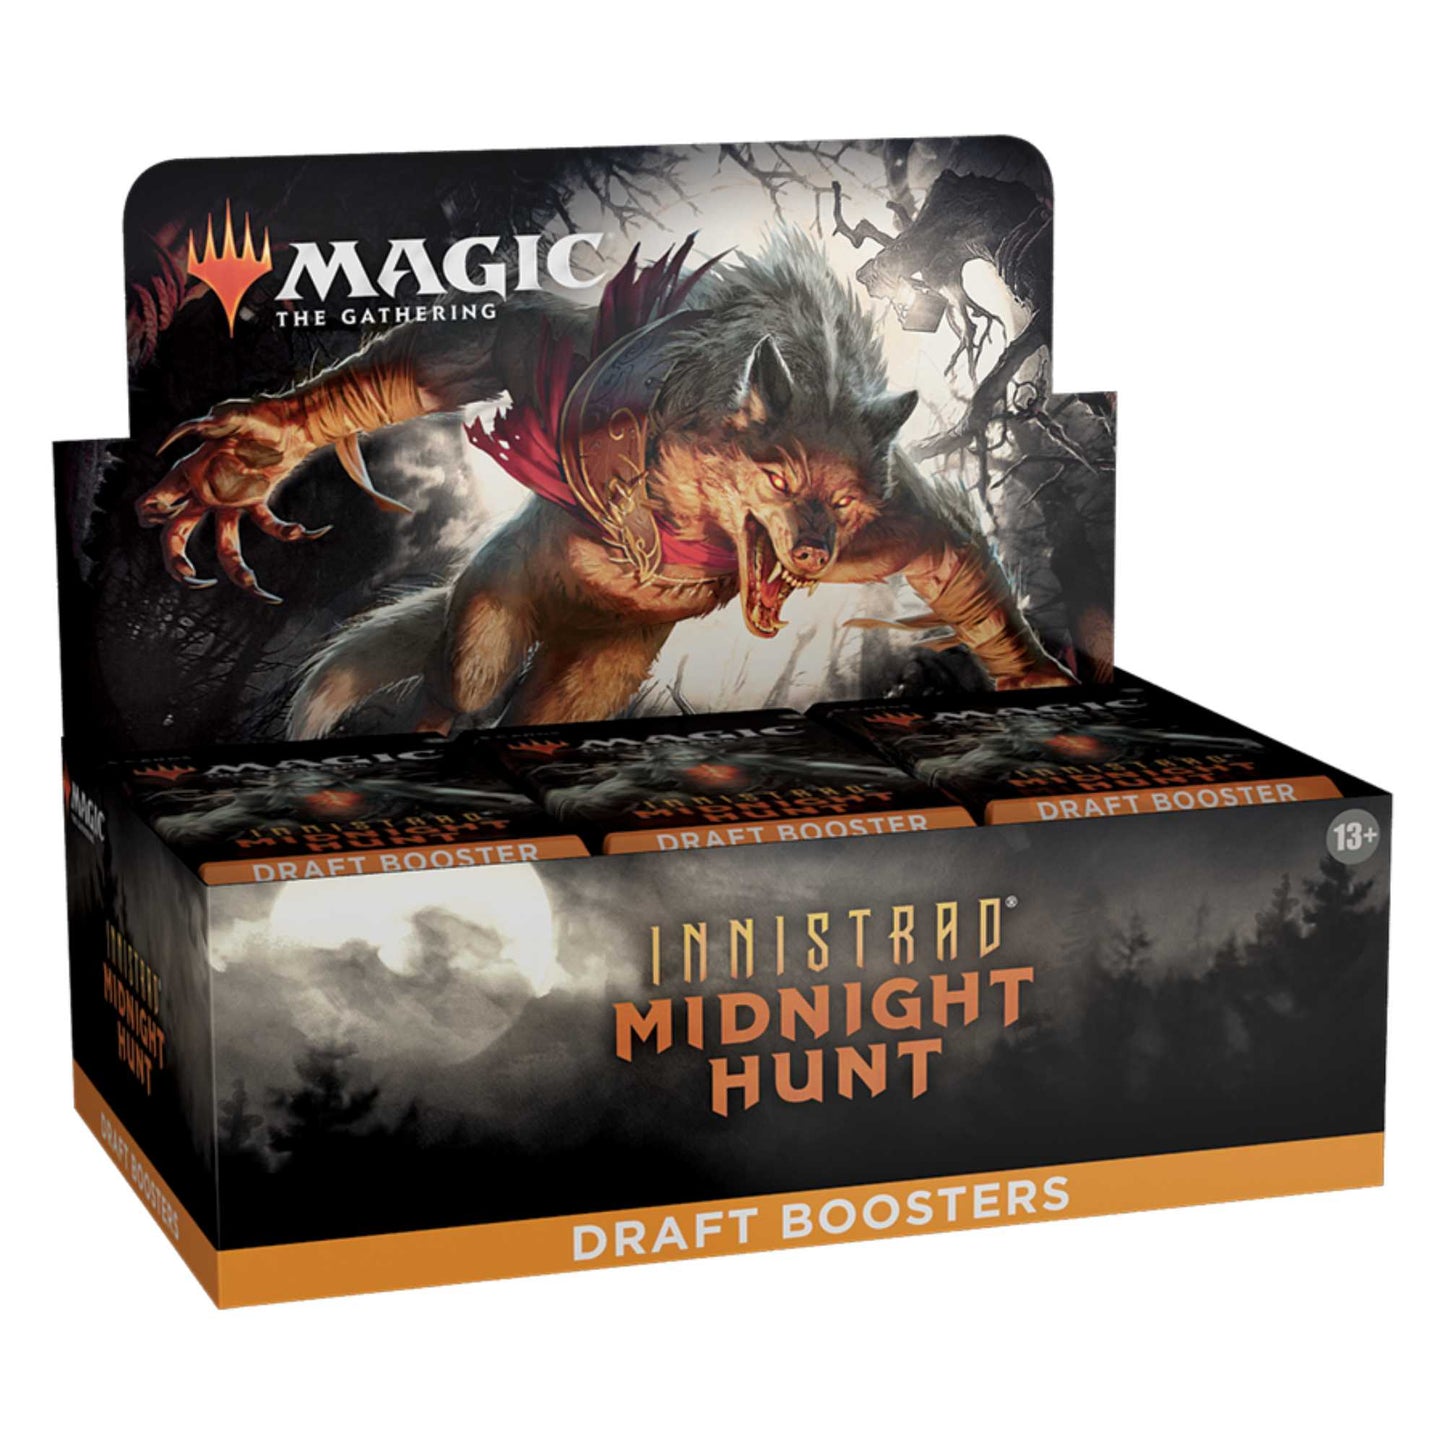 Magic The Gathering - Innistrad Midnight Hunt - Draft Boosters